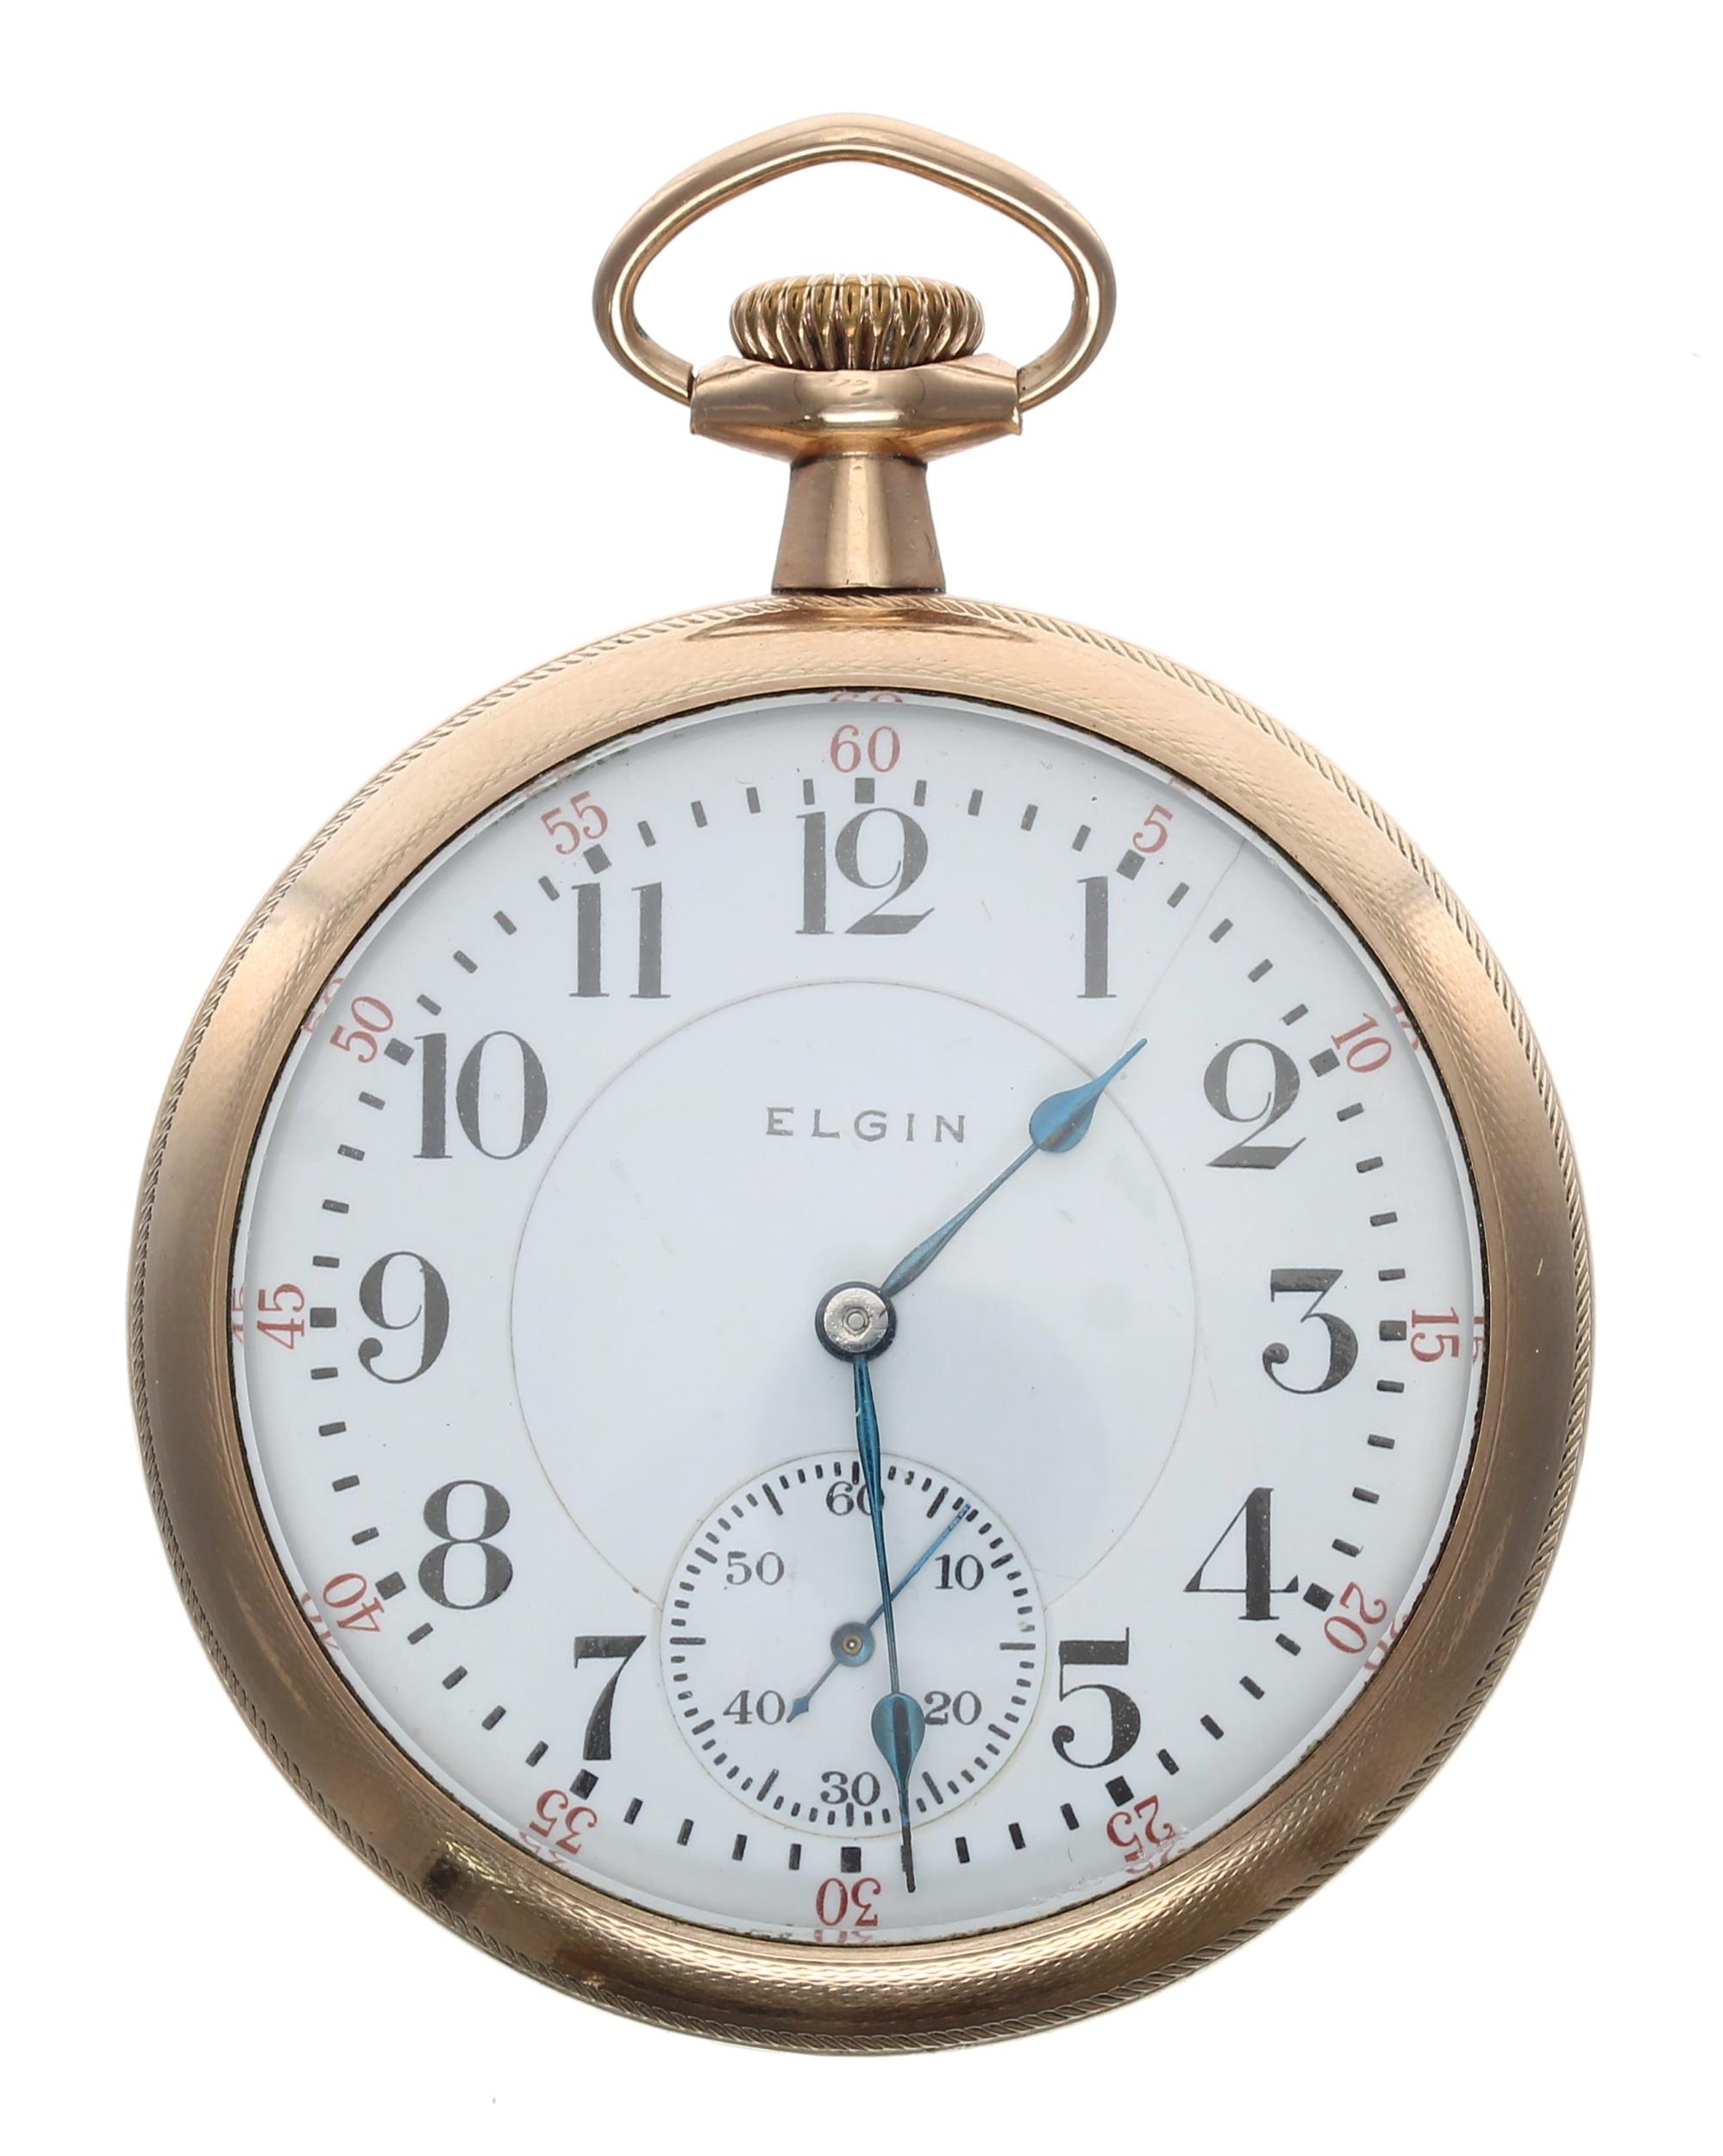 Elgin National Watch Co. 'B.W. Raymond' gold plated lever set pocket watch, circa 1910, signed 19 - Image 2 of 4